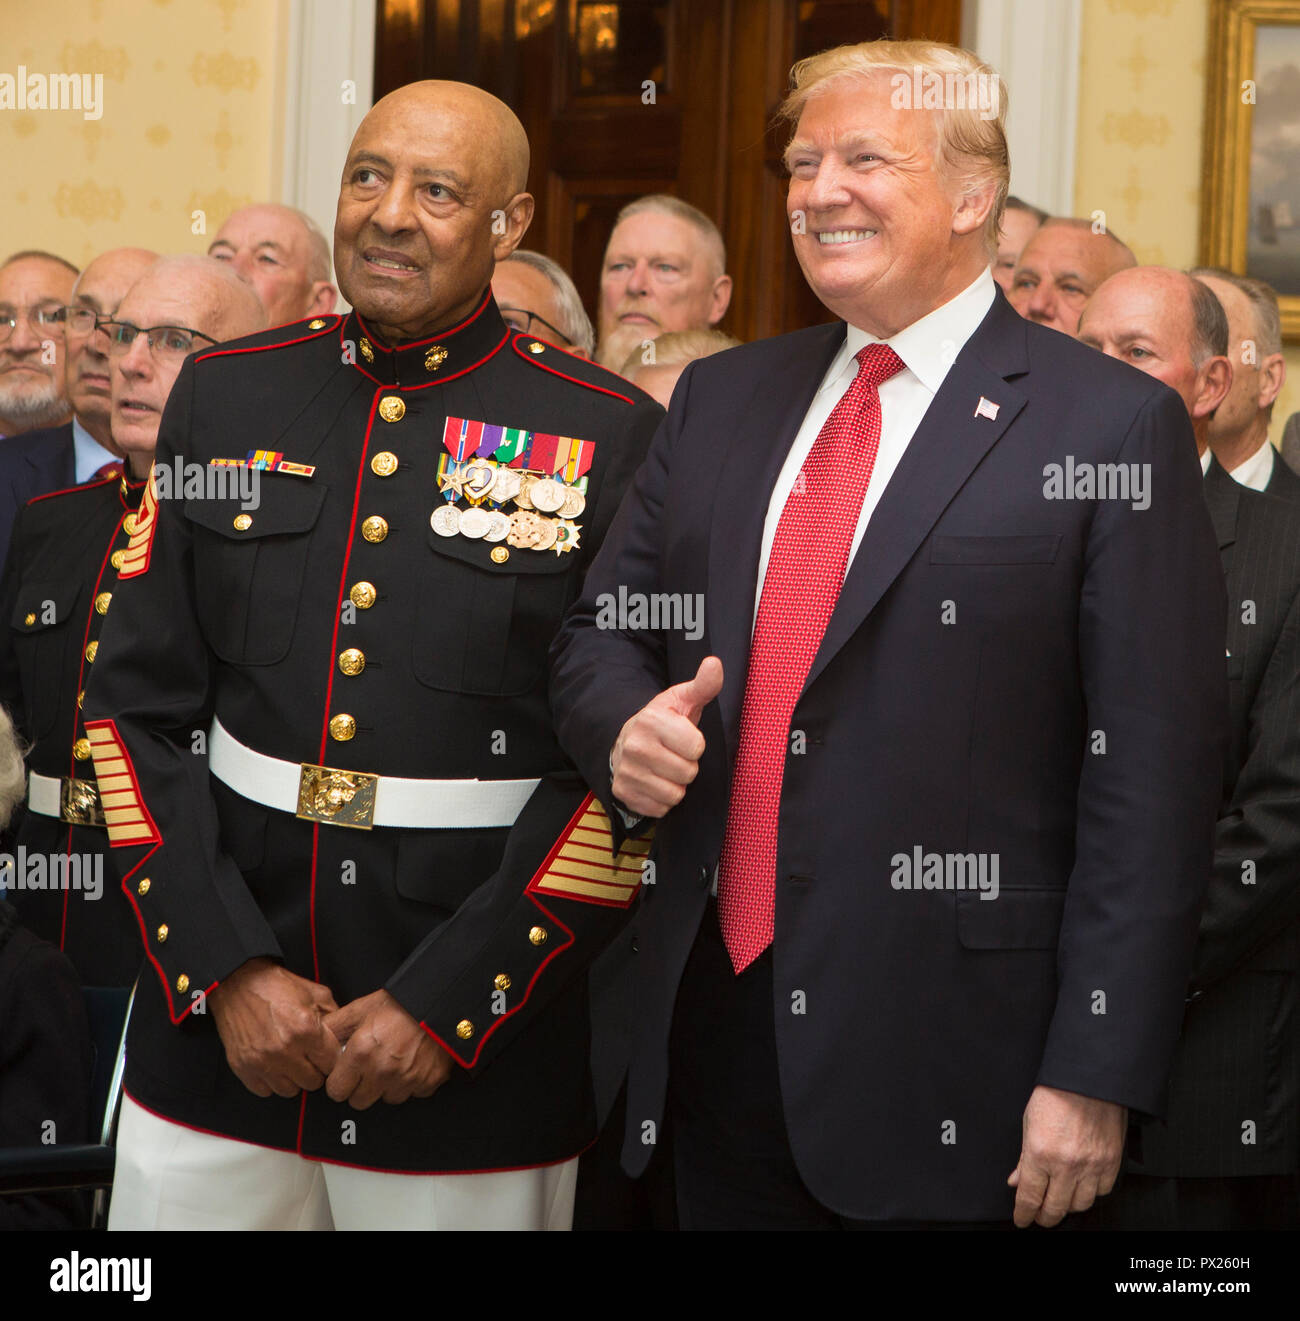 President of the United States Donald J. Trump poses for a photo with retired U.S. Marine Corps Sgt. Maj. John L. Canley, the 300th Marine Medal of Honor recipient, at the White House in Washington, D.C., Oct. 17, 2018. From Jan. 31, to Feb. 6 1968 in the Republic of Vietnam, Canley, the company gunnery sergeant assigned to Alpha Company, 1st Battalion, 1st Marines, took command of the company, led multiple attacks against enemy-fortified positions, rushed across fire-swept terrain despite his own wounds and carried wounded Marines into Hue City, including his commanding officer, to relieve fr Stock Photo